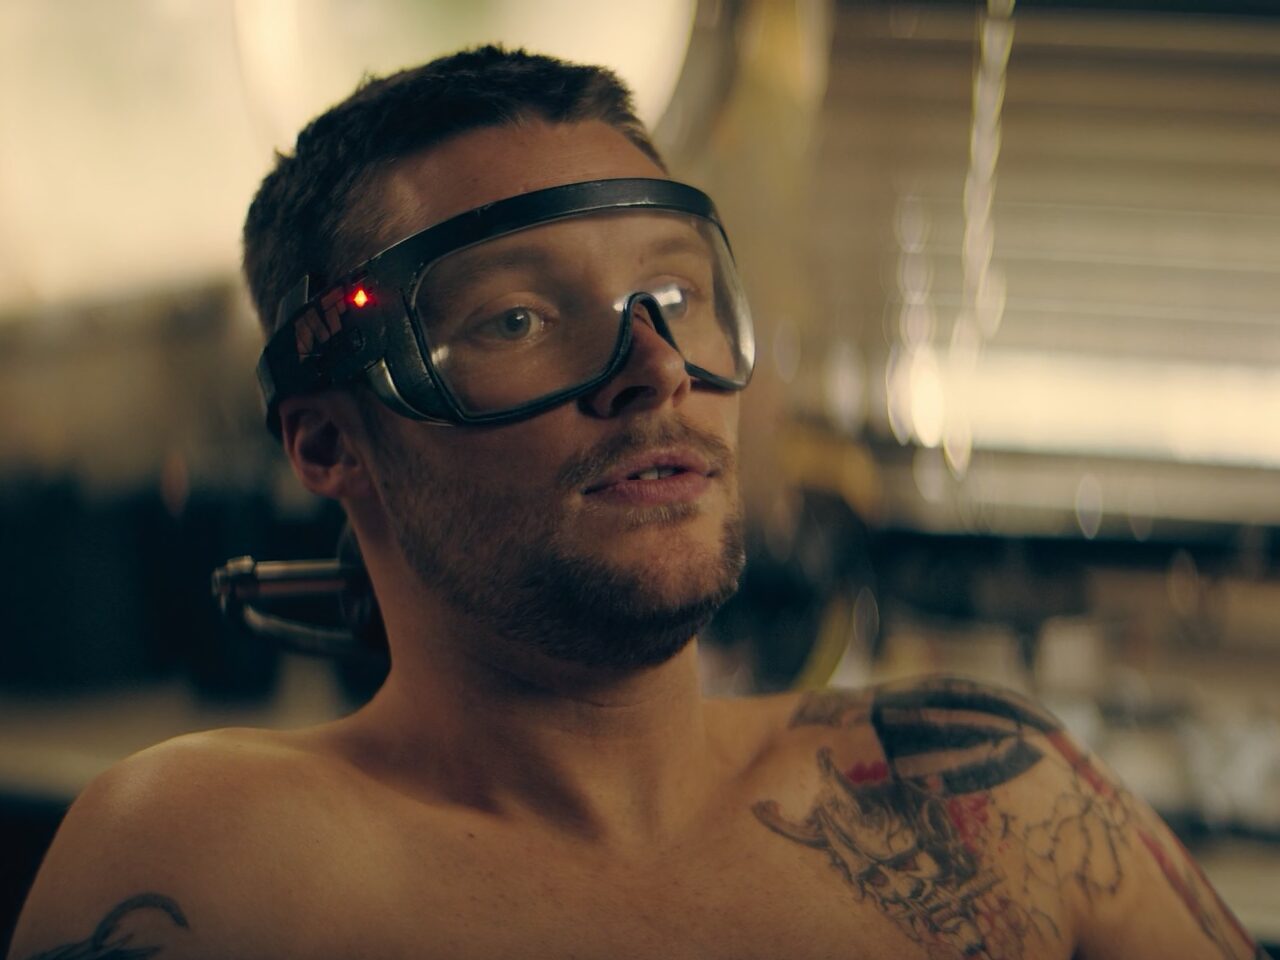 Jack Reynor as Burton Fisher using a traditional VR headset with display in transparent mode. As seen in The Peripheral (2022)